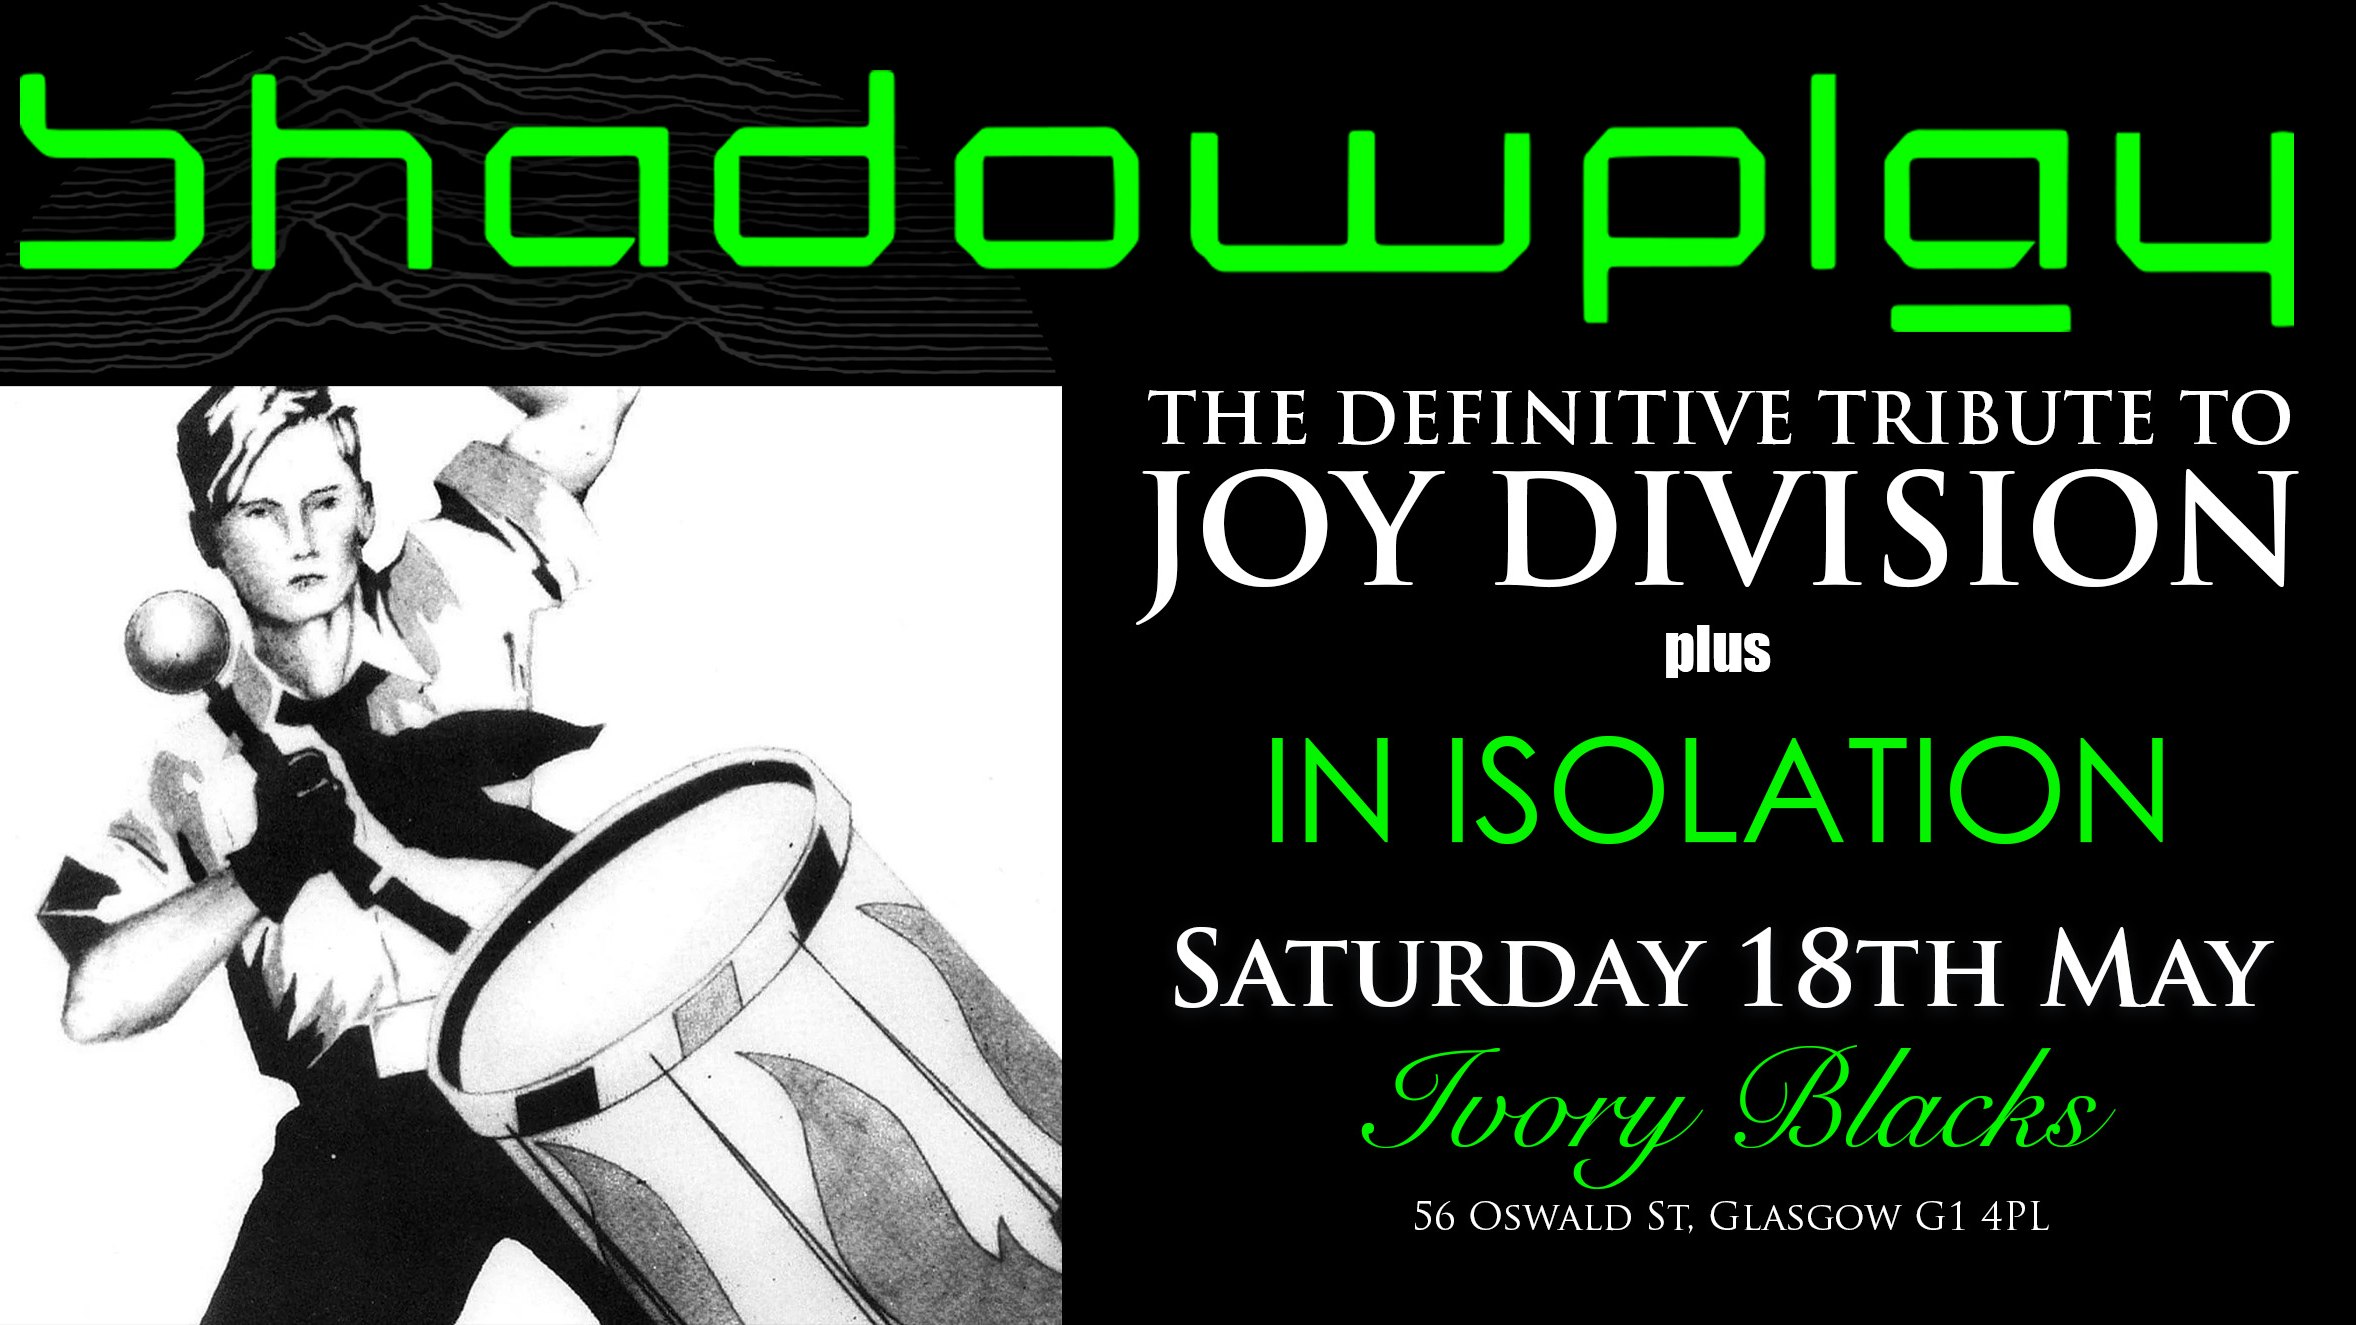 RESCHEDULED DATE  –  SHADOWPLAY  The Definitive Joy Division Tribute + IN ISOLATION